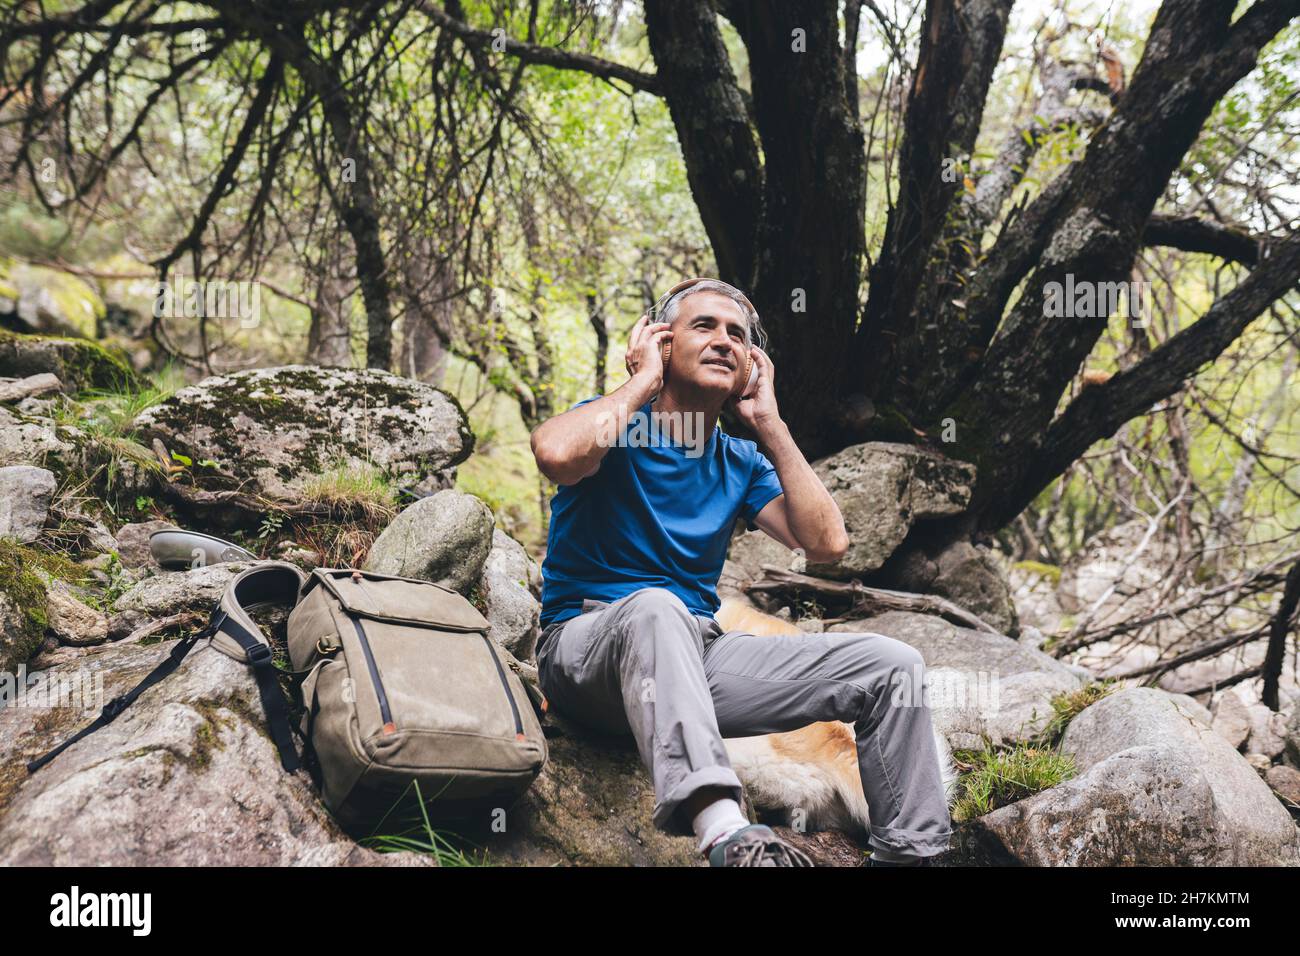 Man recording sound of nature through smart phone while sitting by dog in forest Stock Photo